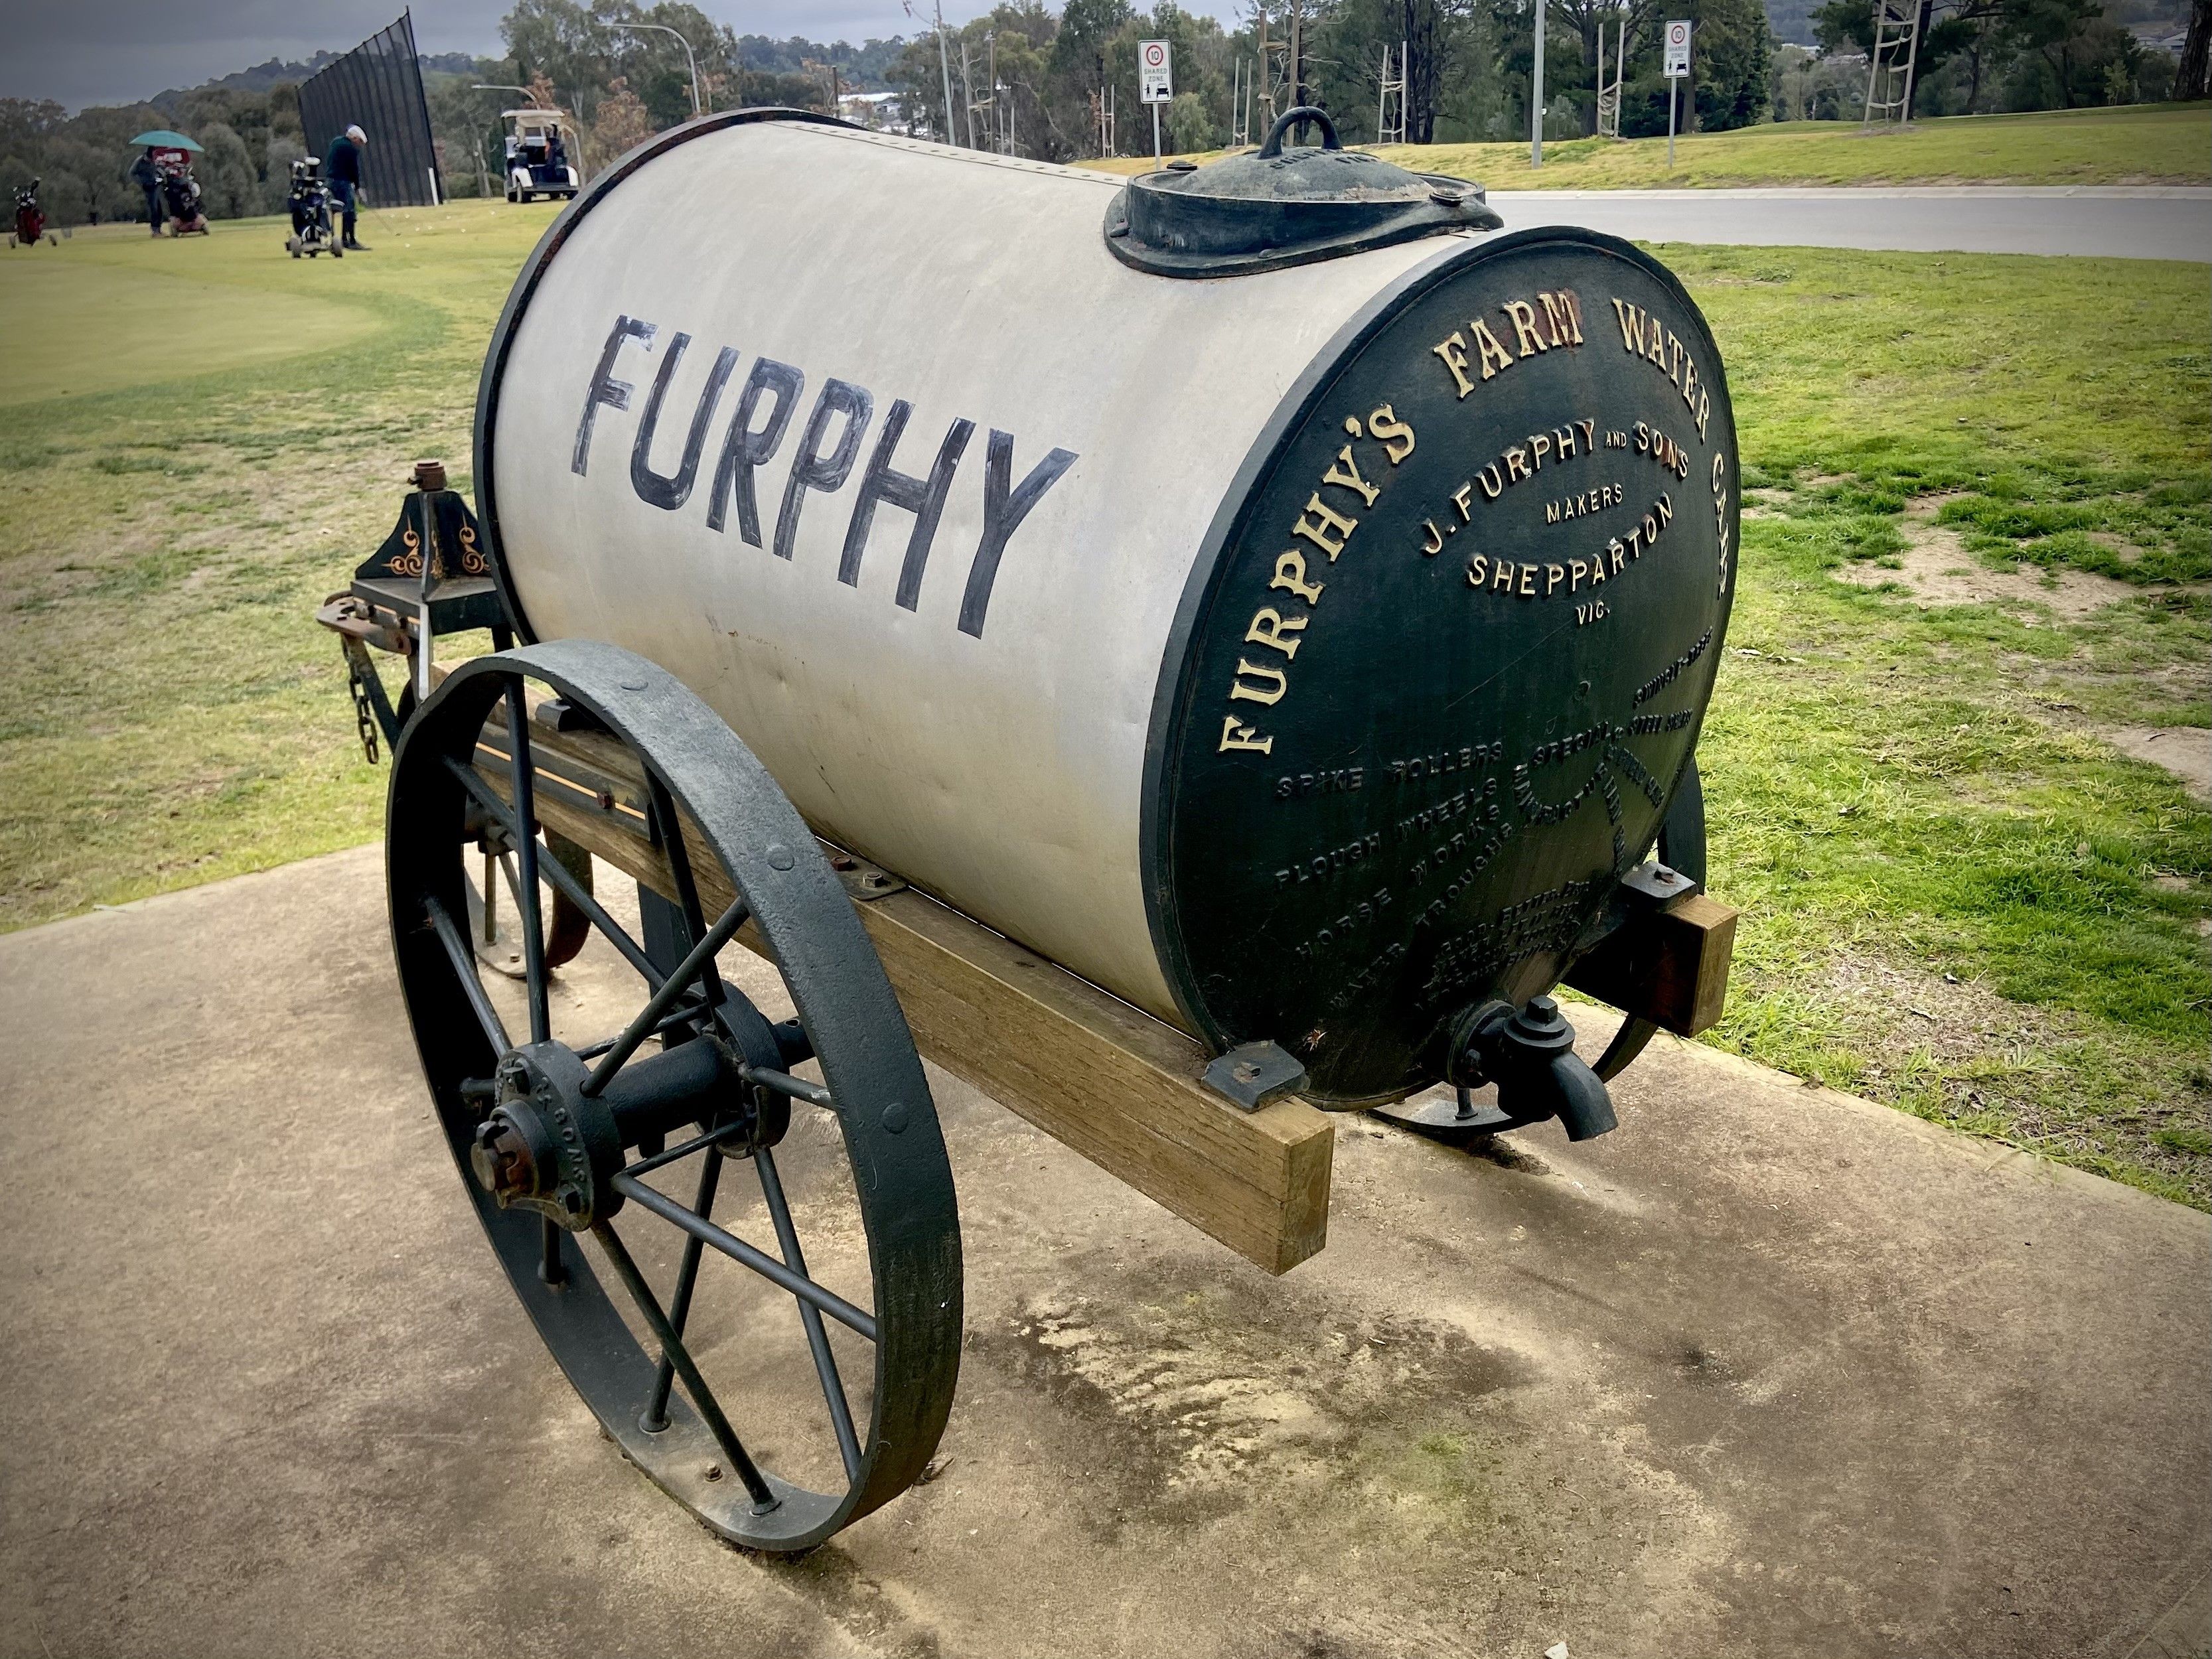 The true story of Furphy's lasting legacy in the Riverina